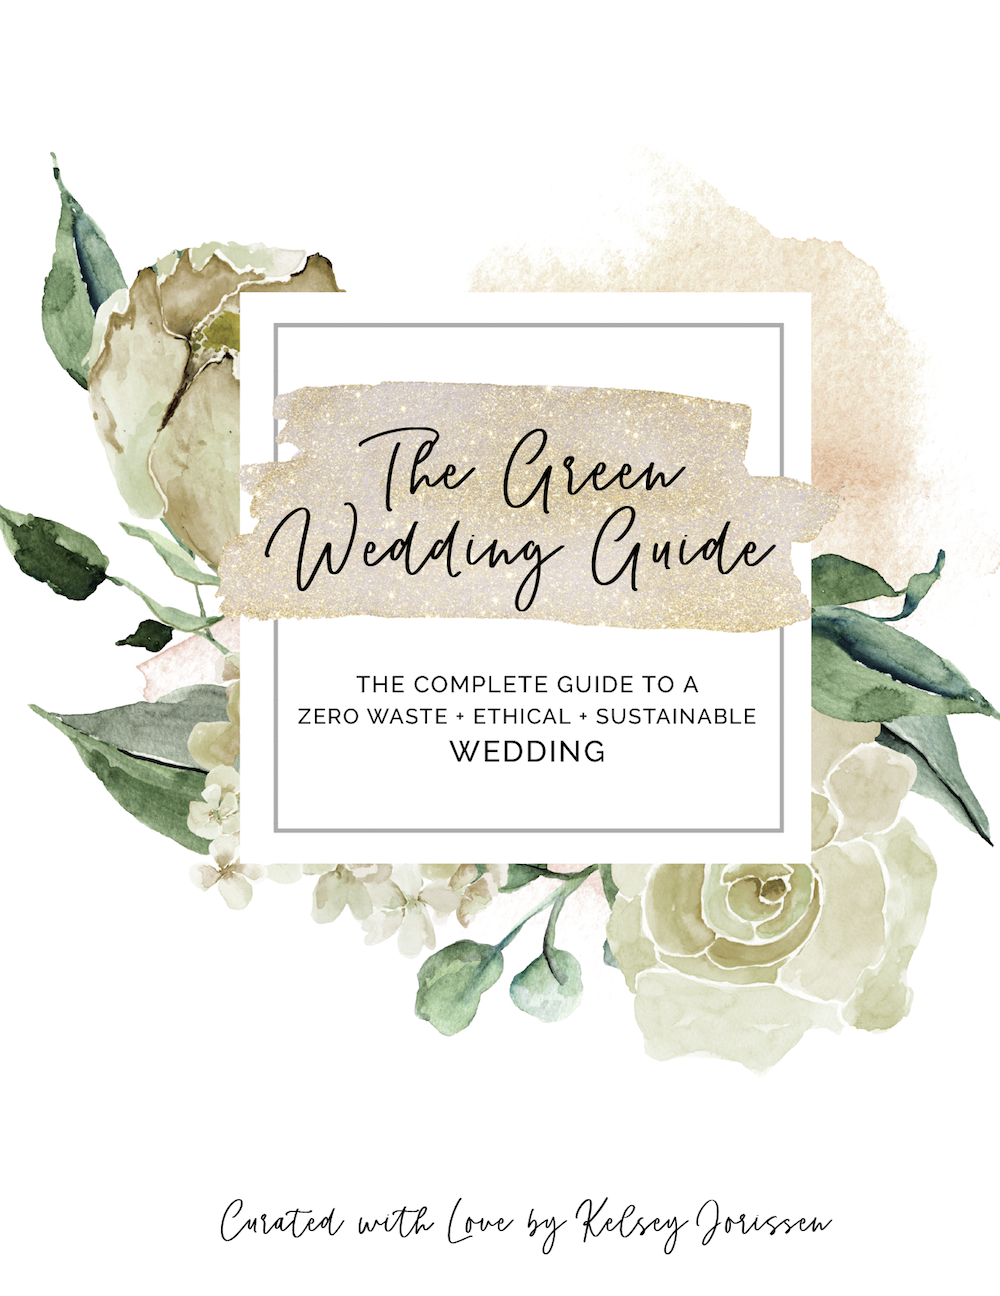 How to have a zero-waste, ethical, and sustainable wedding